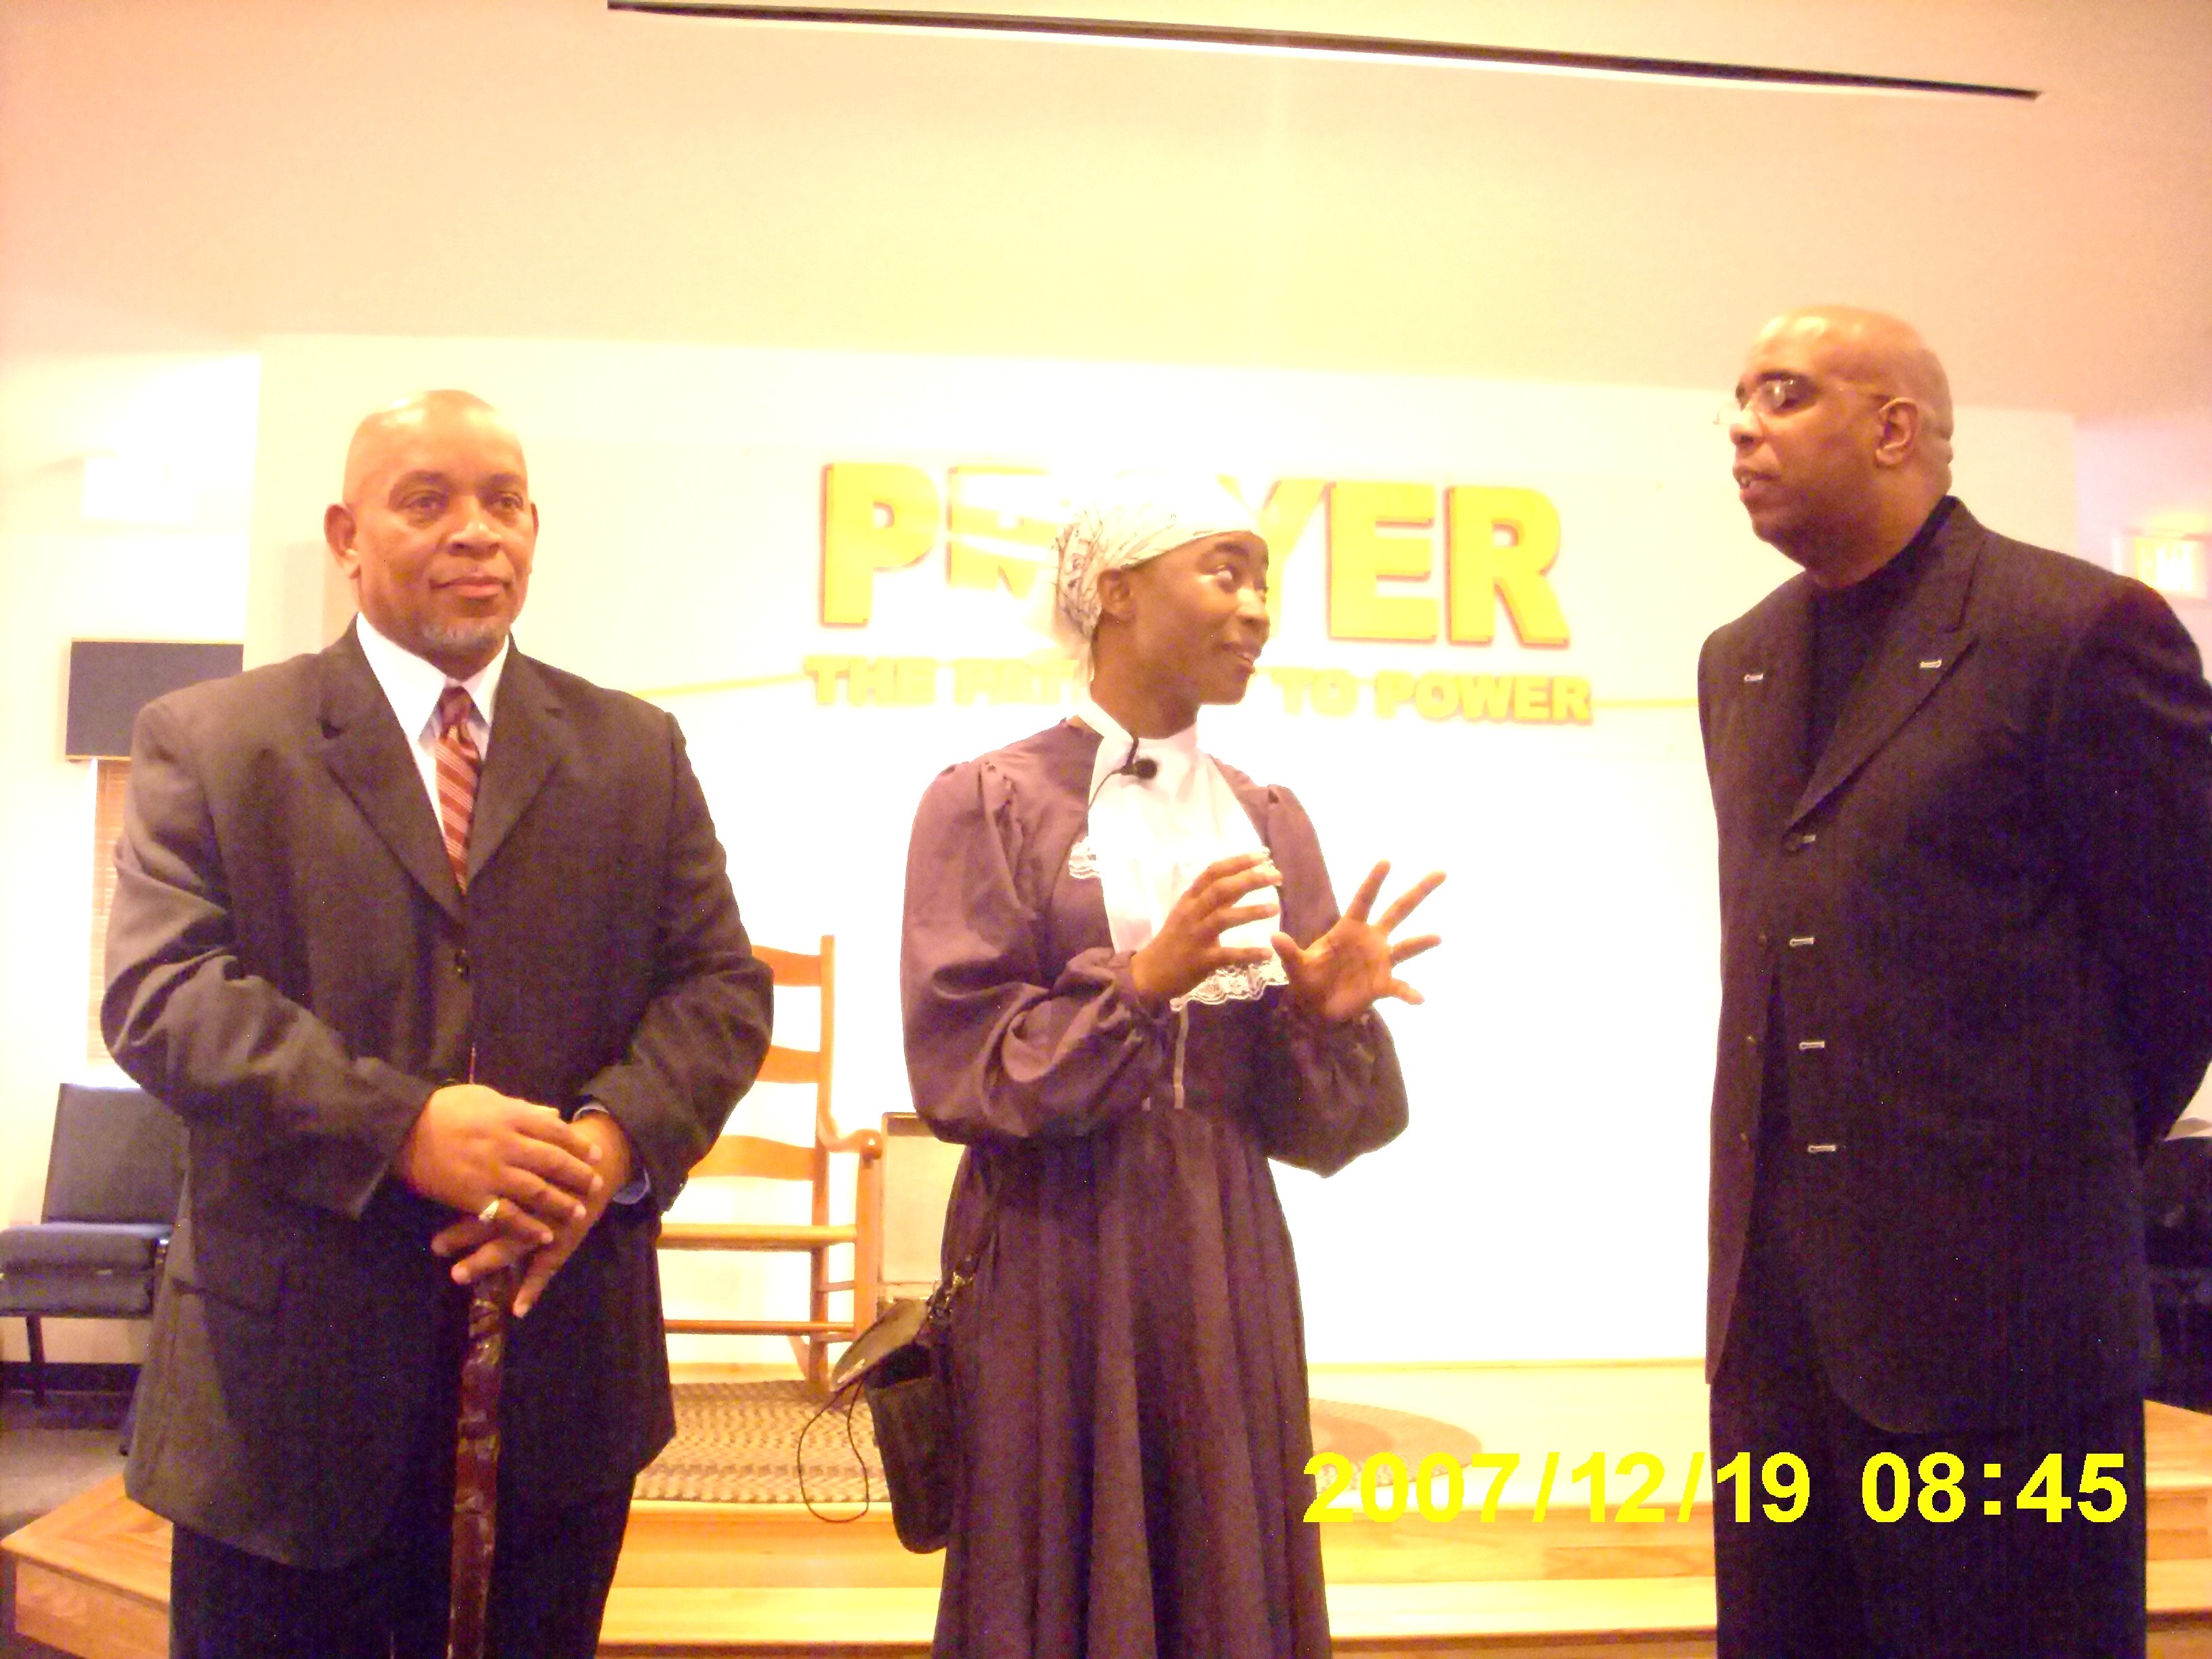 Mojo introduces his one-woman Harriet Tubman show with pastor, singer Dexter Edmonds.